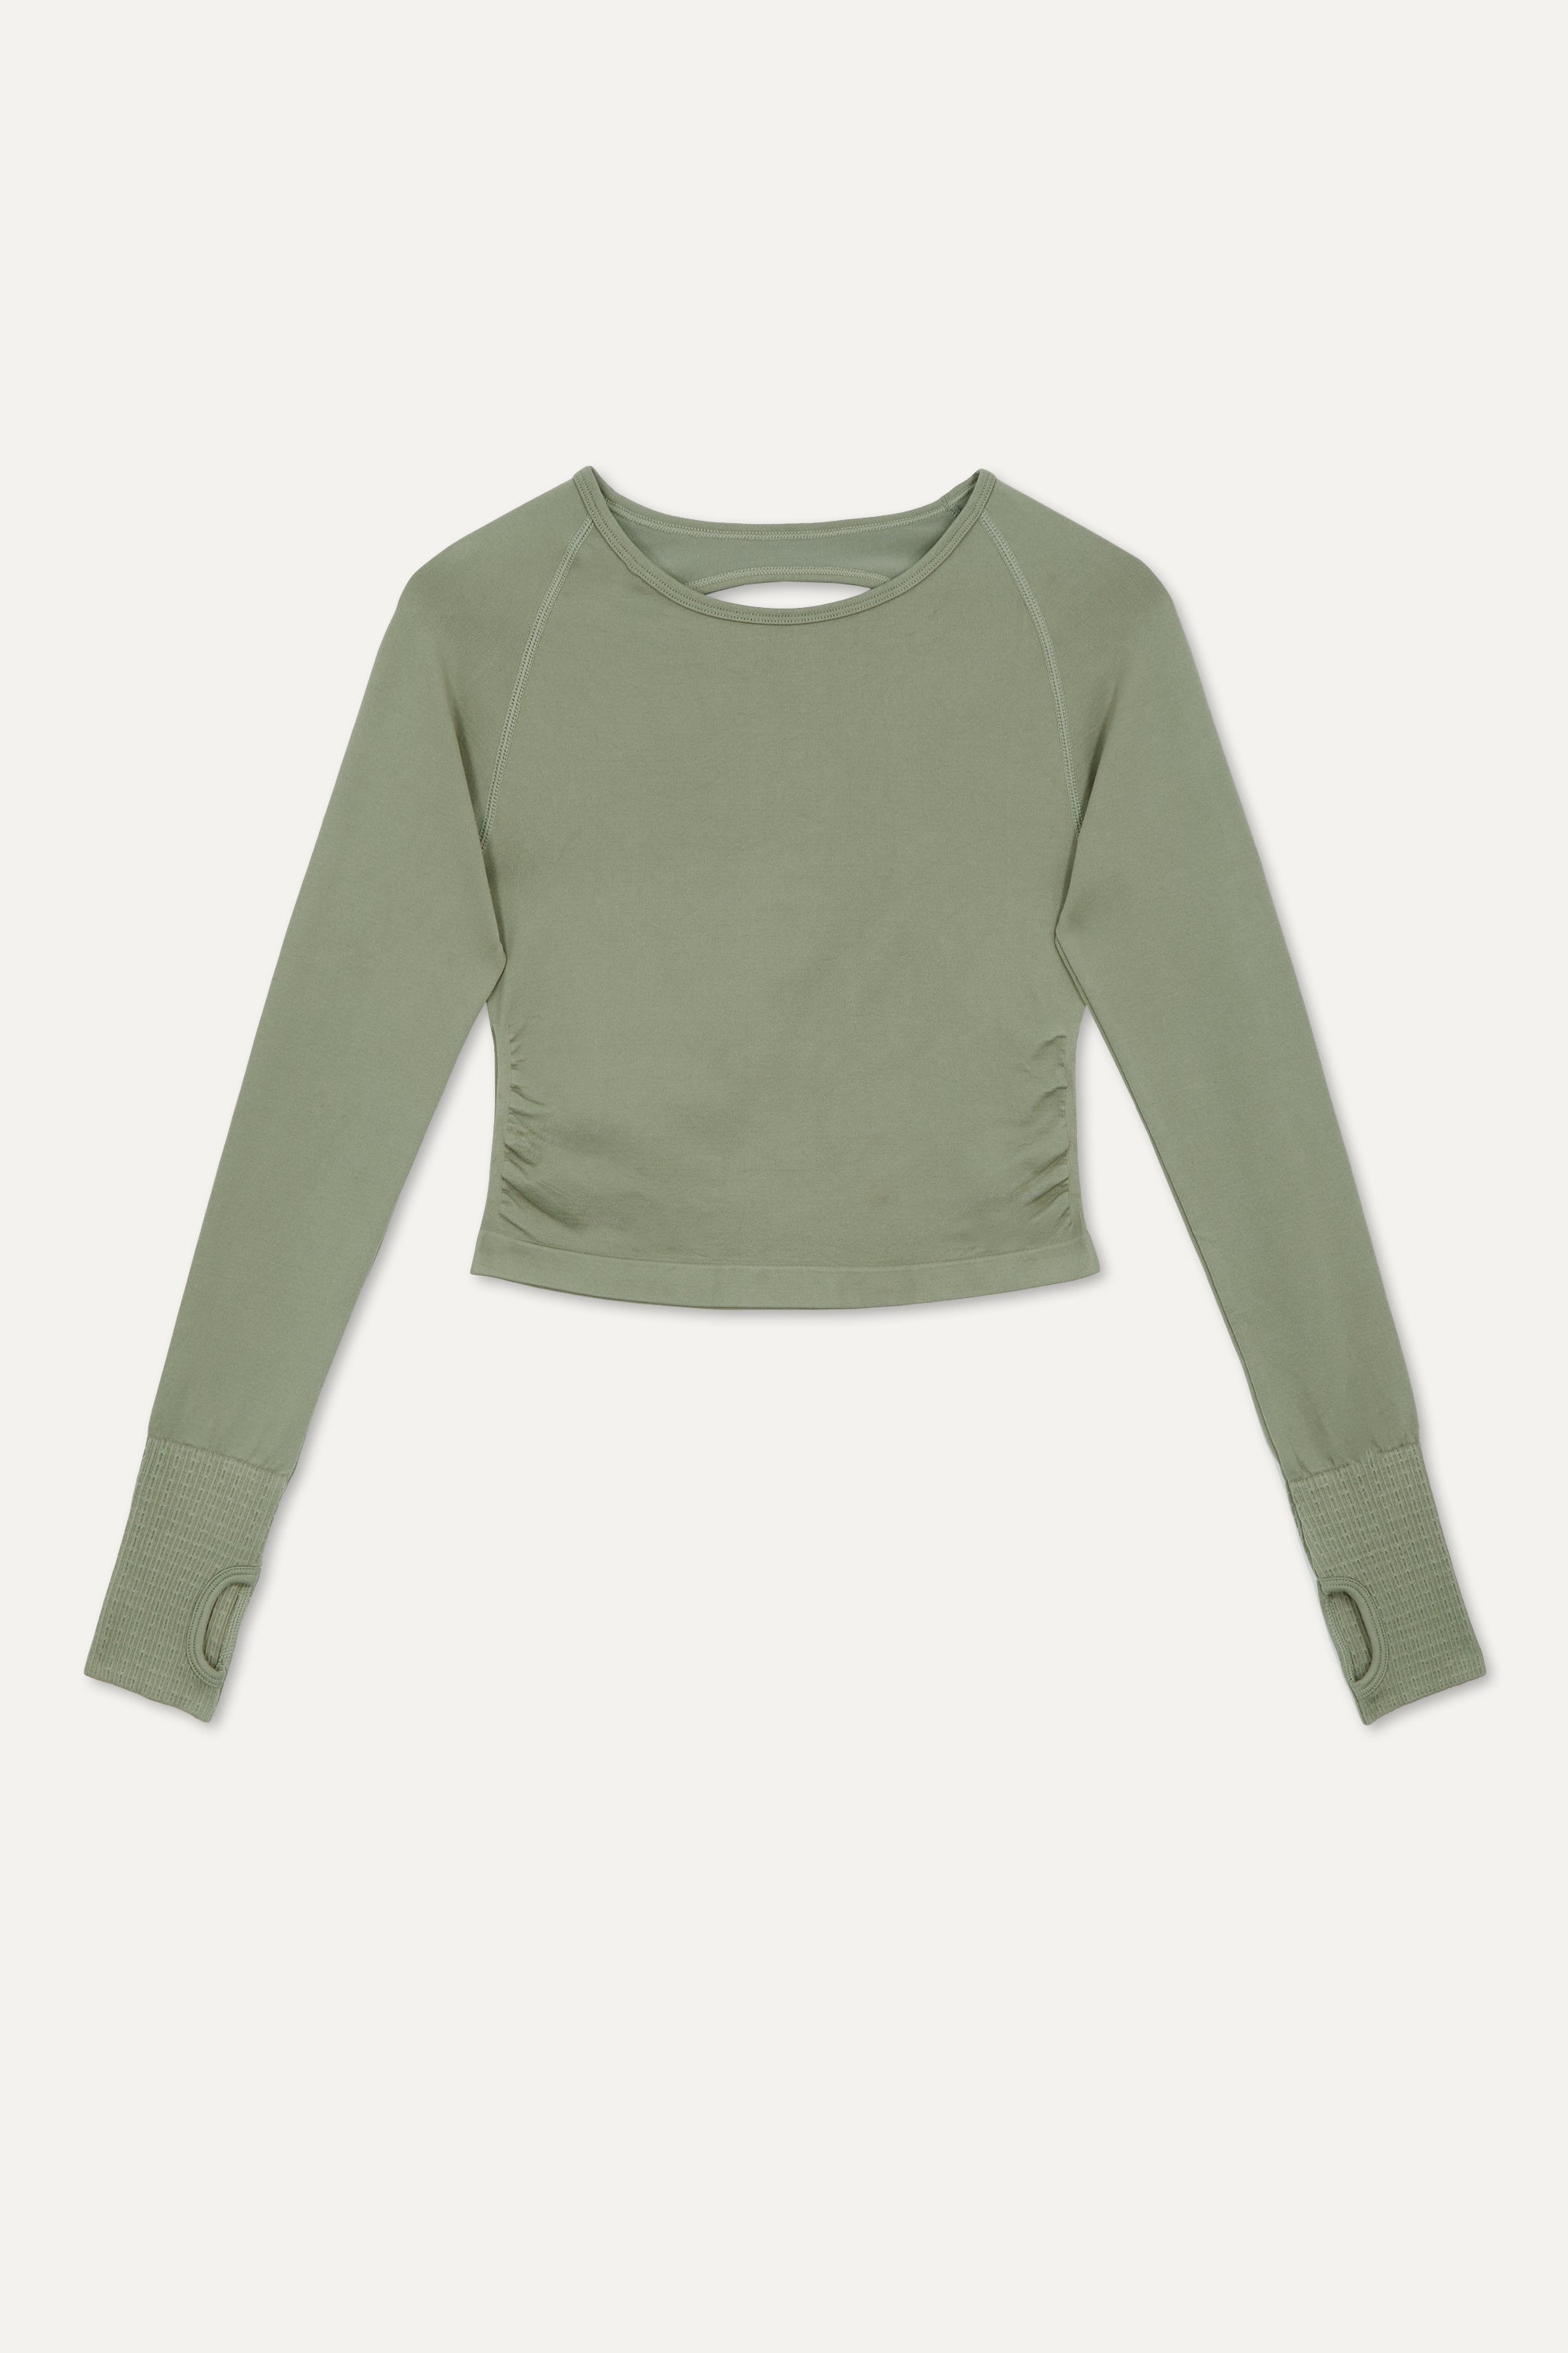 Seagrass green cutout back cropped long sleeve top with thumbholes and side ruching made from recycled fabrics for yoga, pilates, cycling, gym and exercise by sustainable activewear brand Jilla Active  Edit alt text